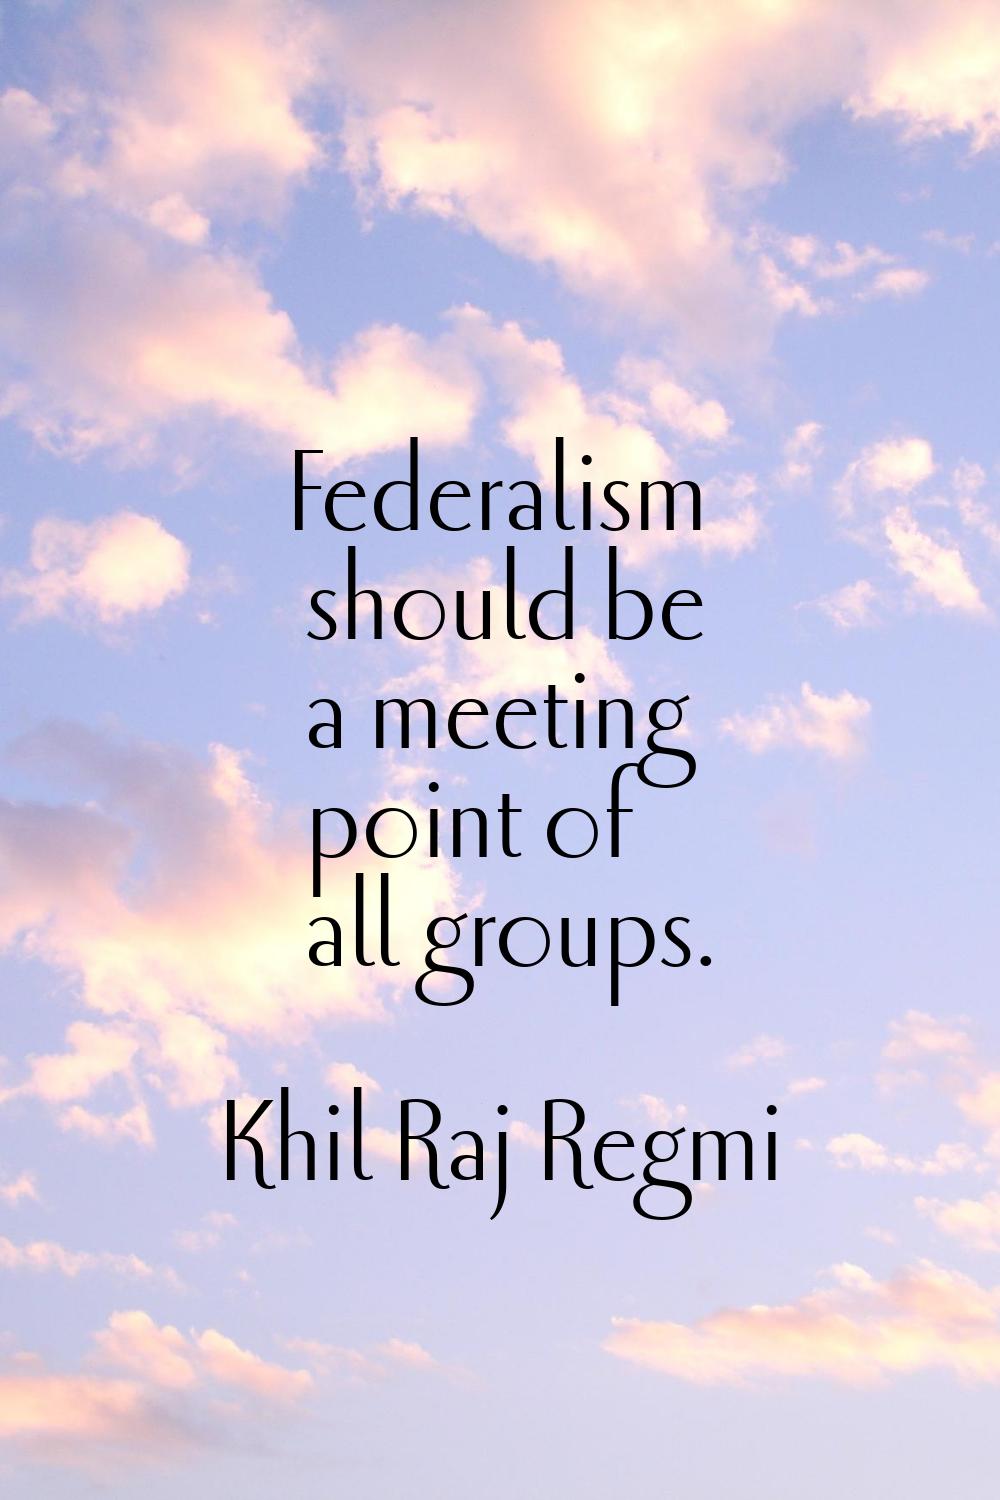 Federalism should be a meeting point of all groups.